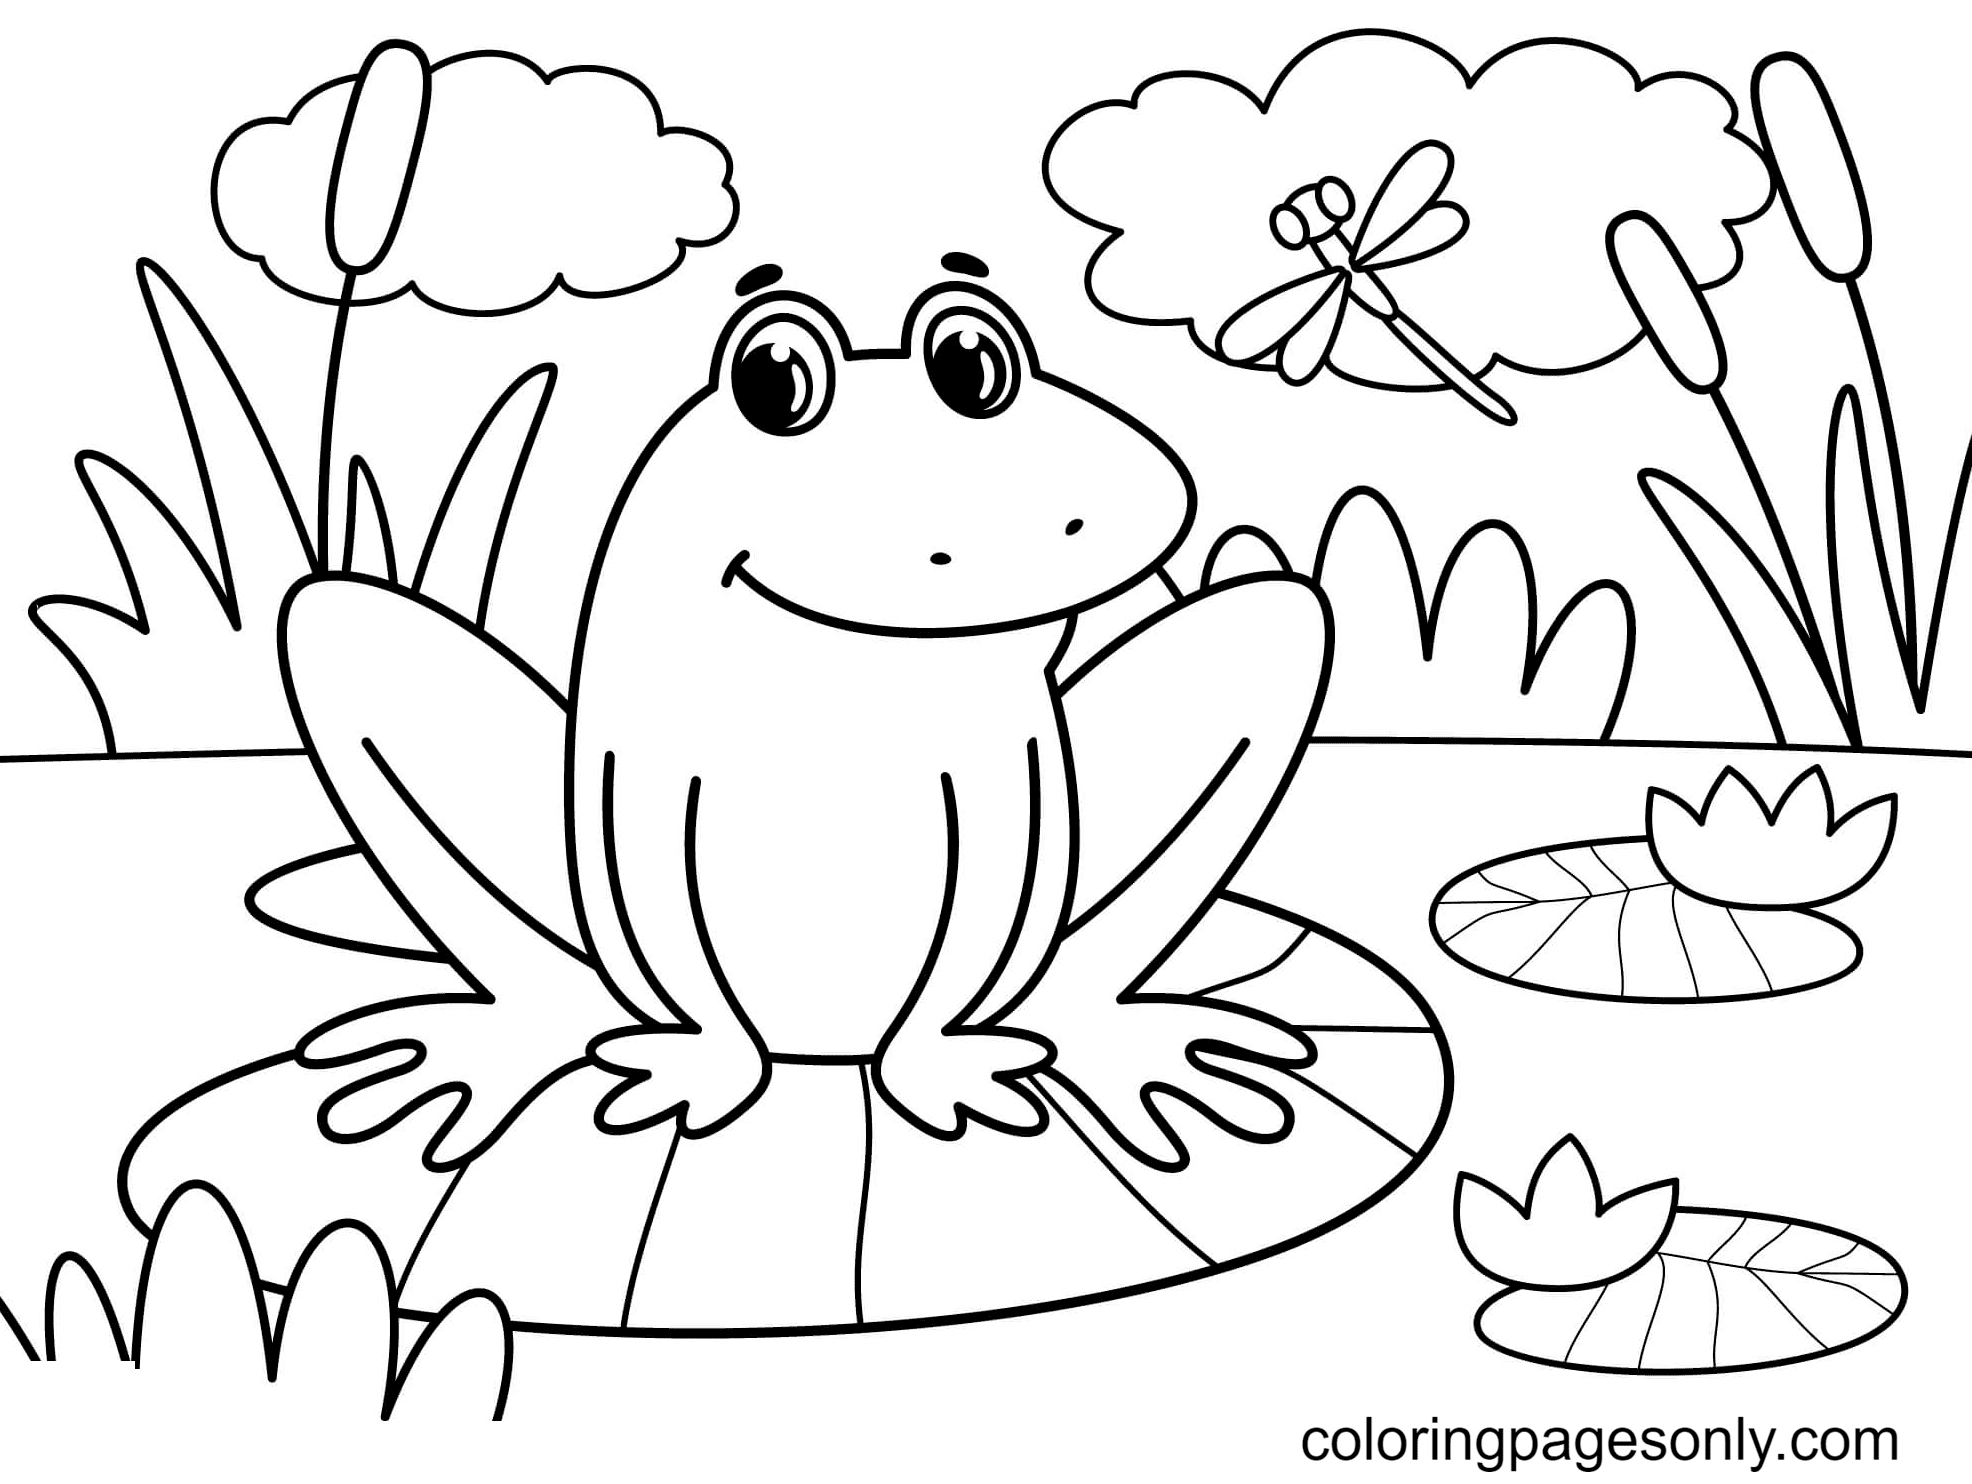 Frog Sitting On a Leaf Looking a Dragonfly Coloring Page